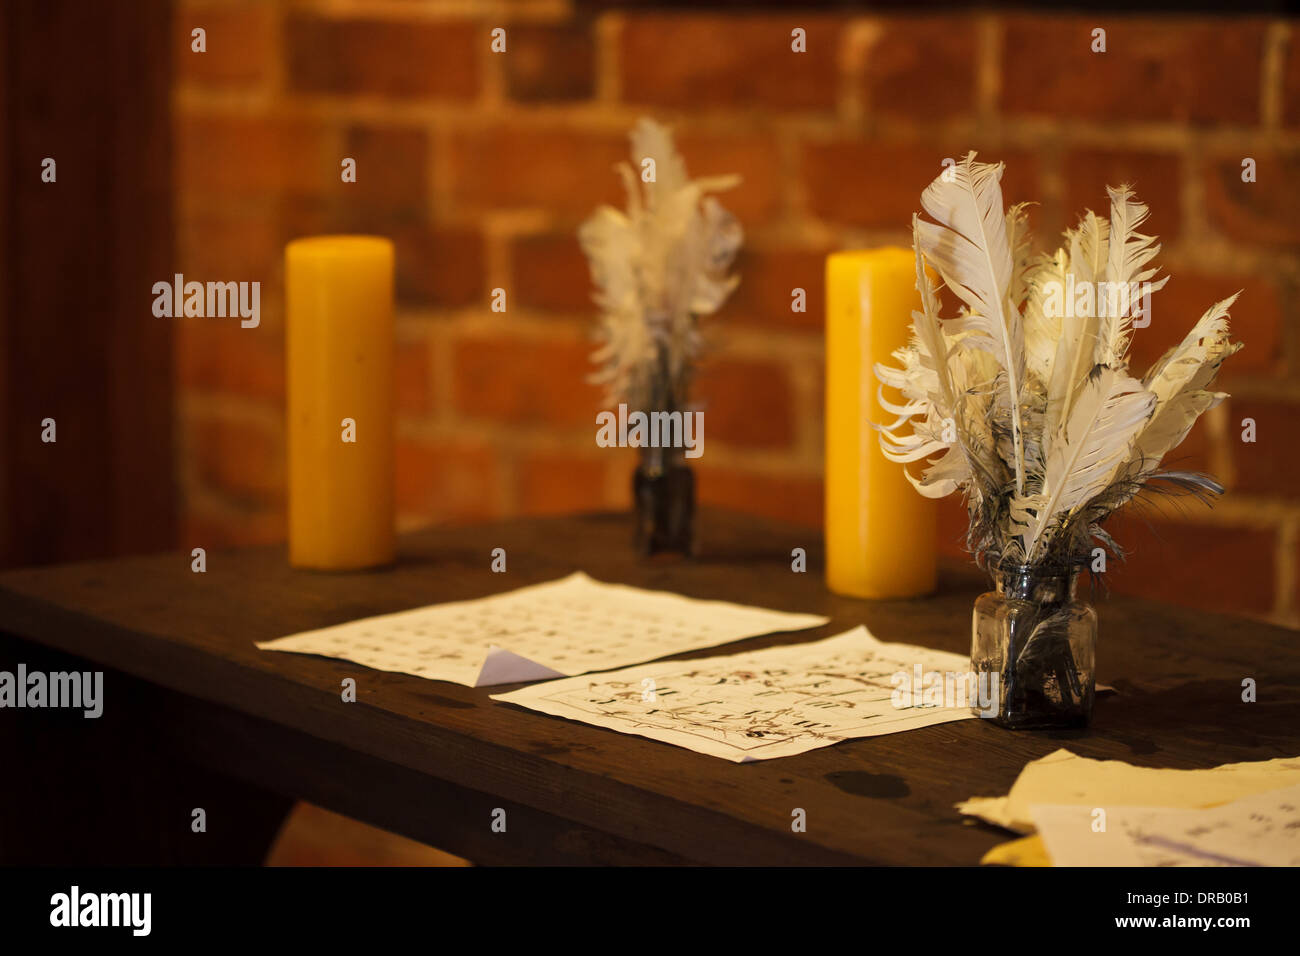 Writing. Feather quill pens, candle and old sheet of paper on wooden desk. Vintage retro style. Stock Photo